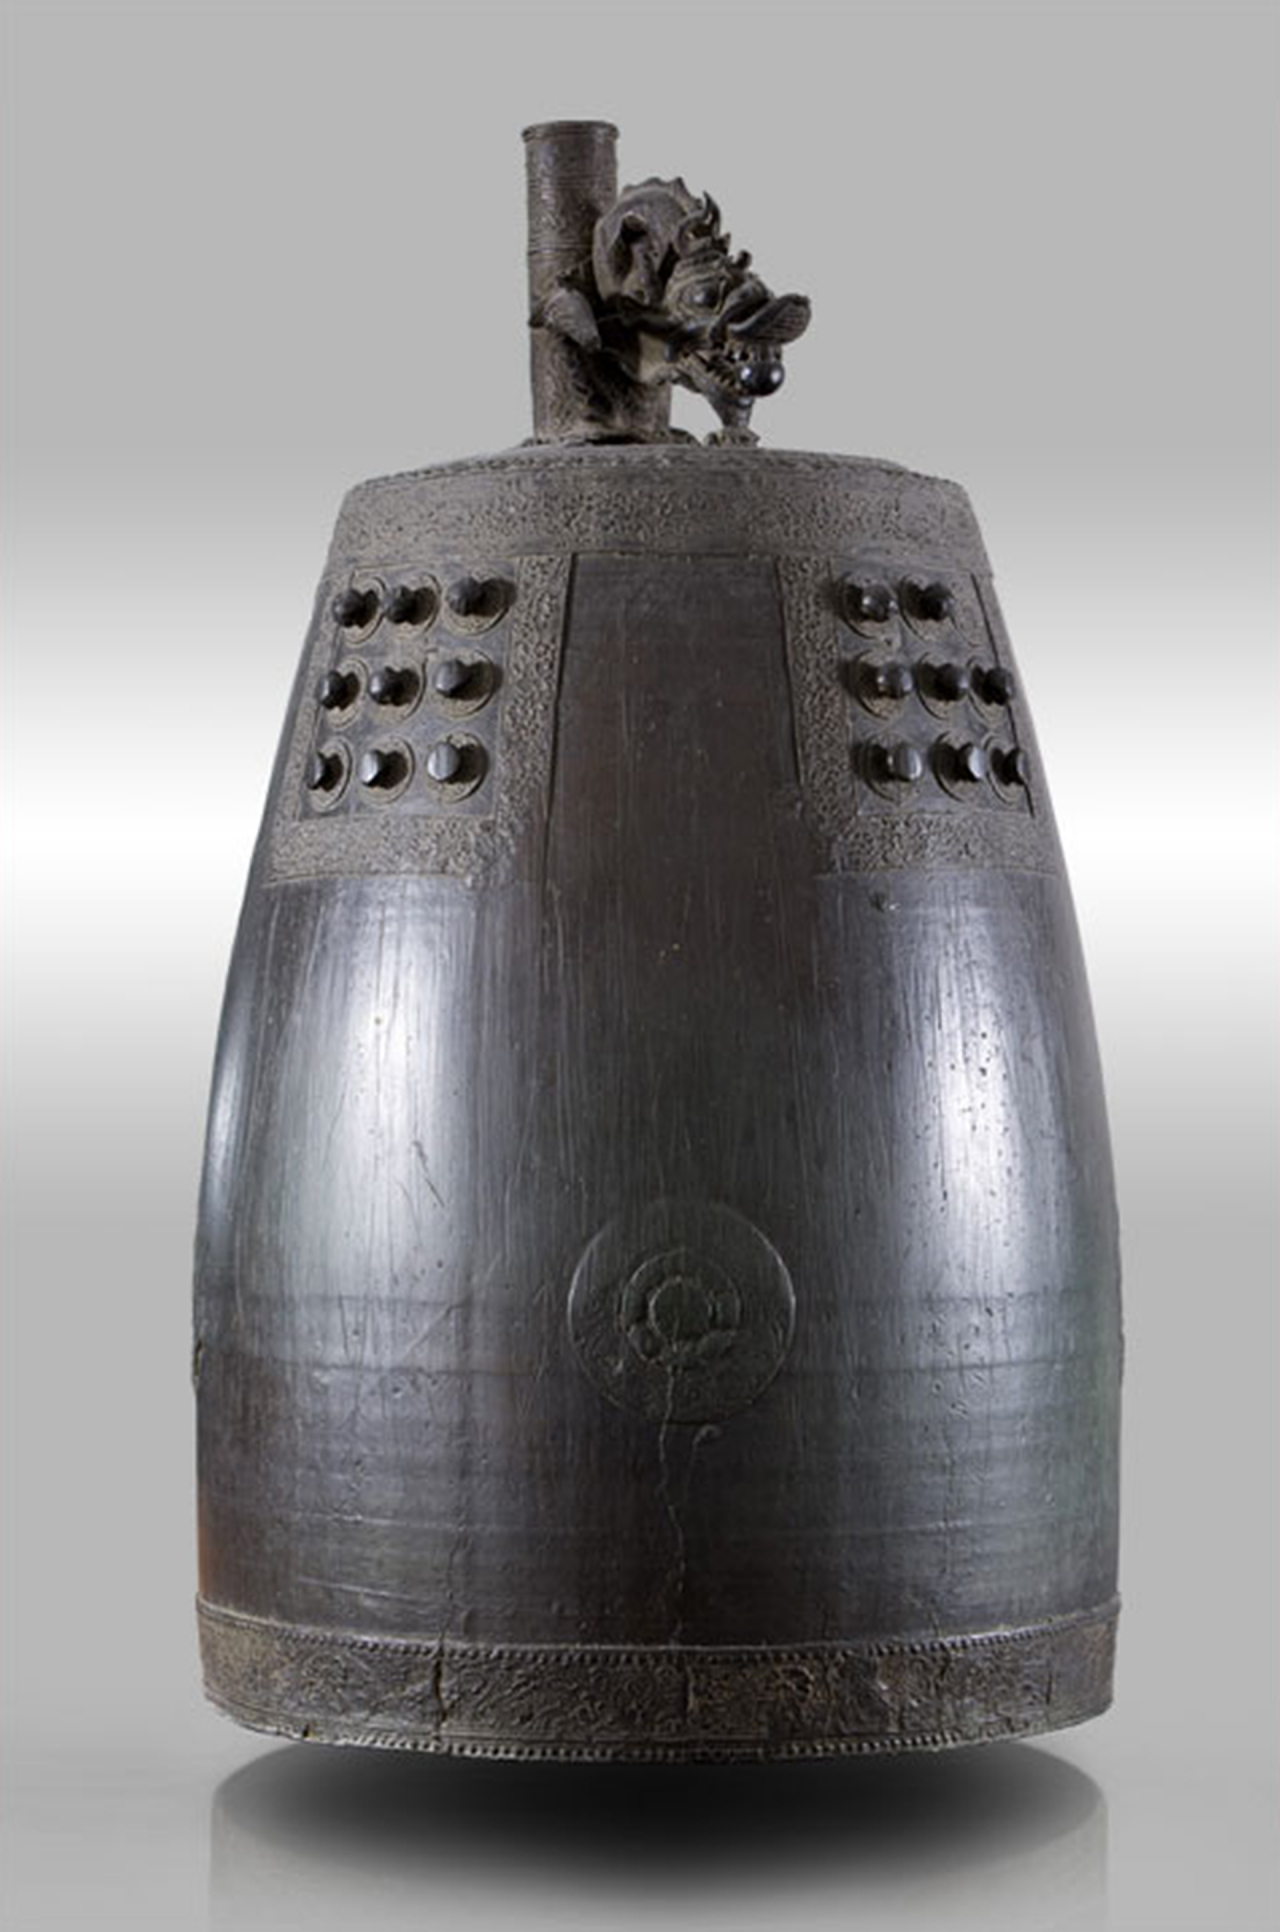 Bronze Bell of Cheonheungsa from the Goryeo Kingdom, National Treasure No. 280, is on display at the National Museum of China in Beijing. (CHA)